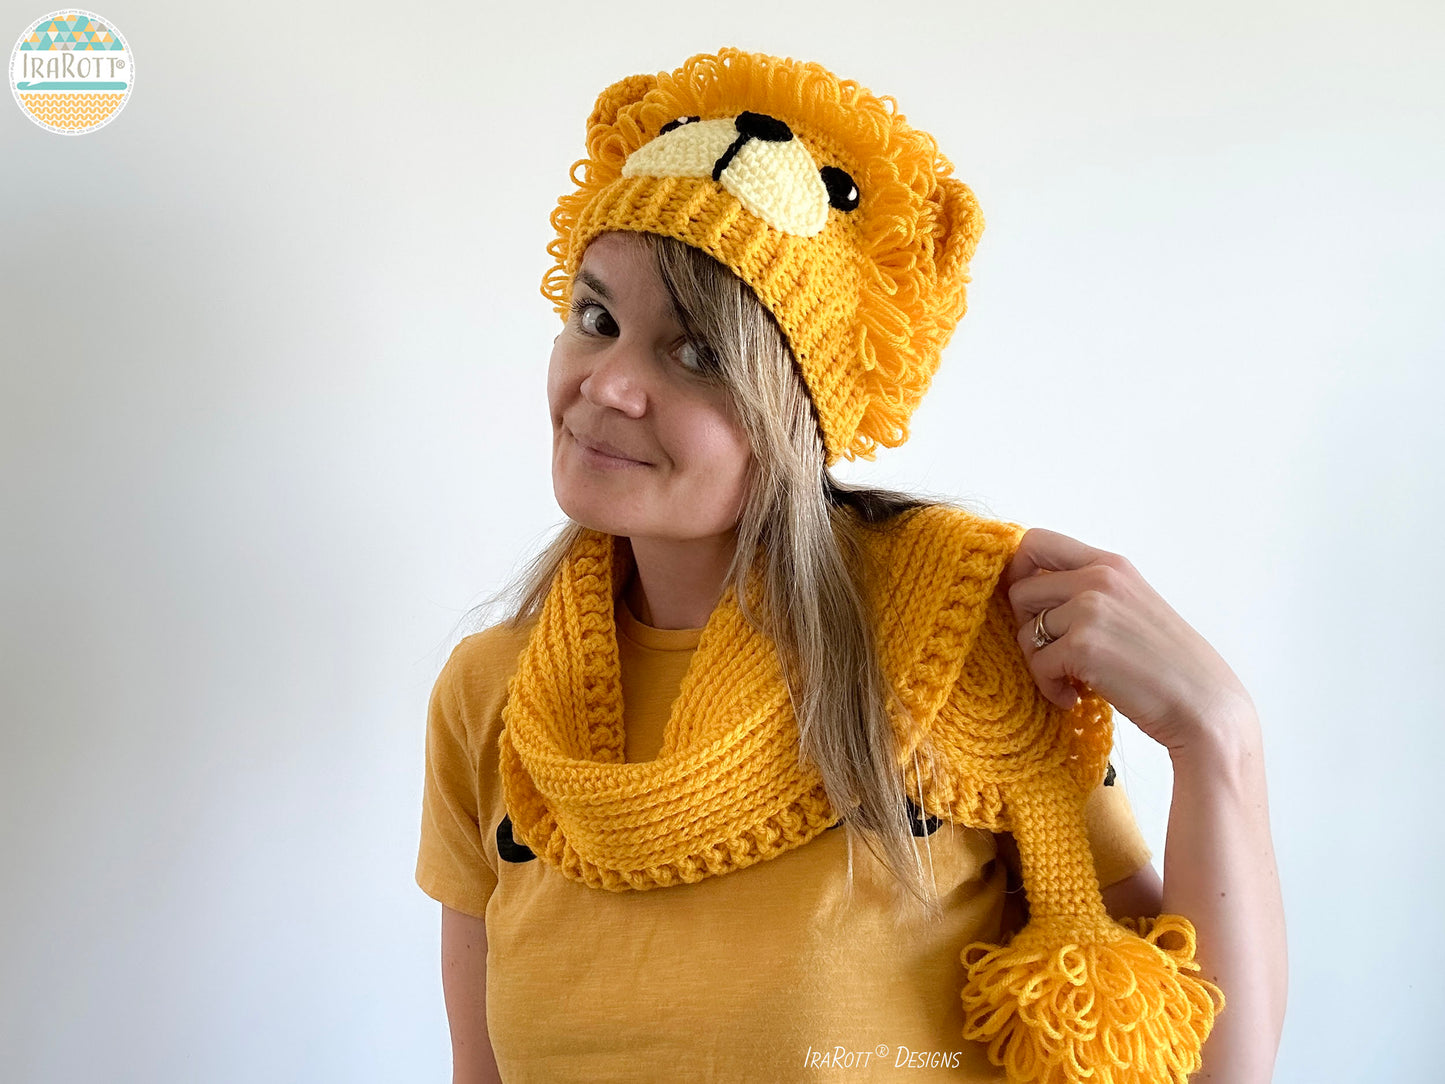 The Roaring Lion Hat and Scarf Crochet Pattern